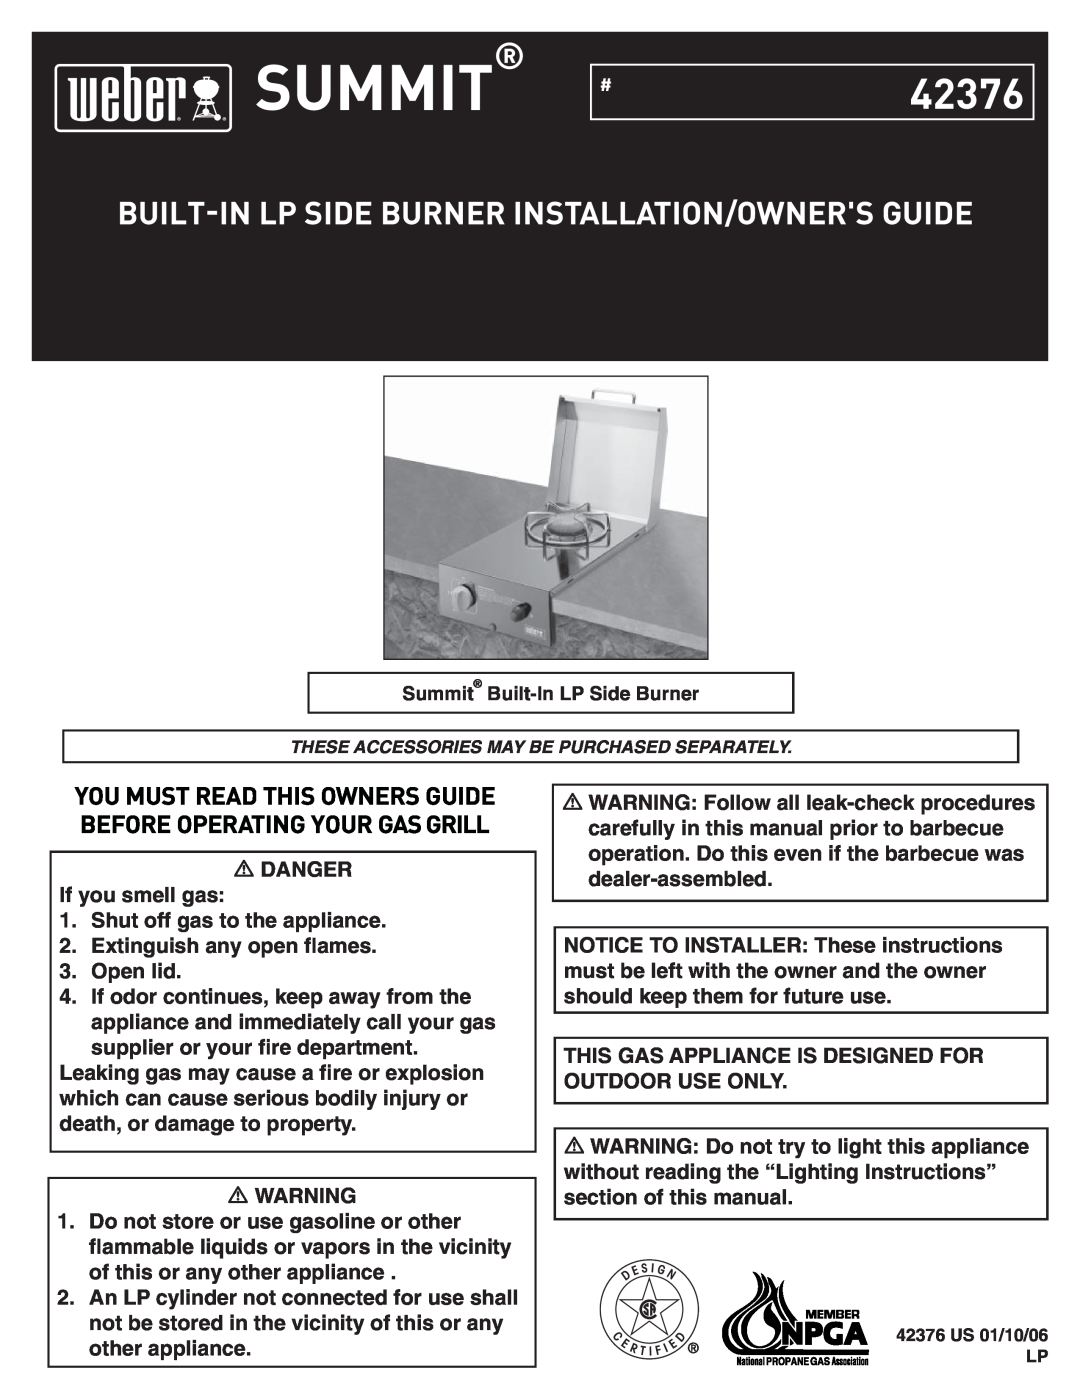 Weber manual Built-Inlp Side Burner Installation/Owners Guide, DANGER If you smell gas, Summit, #42376 